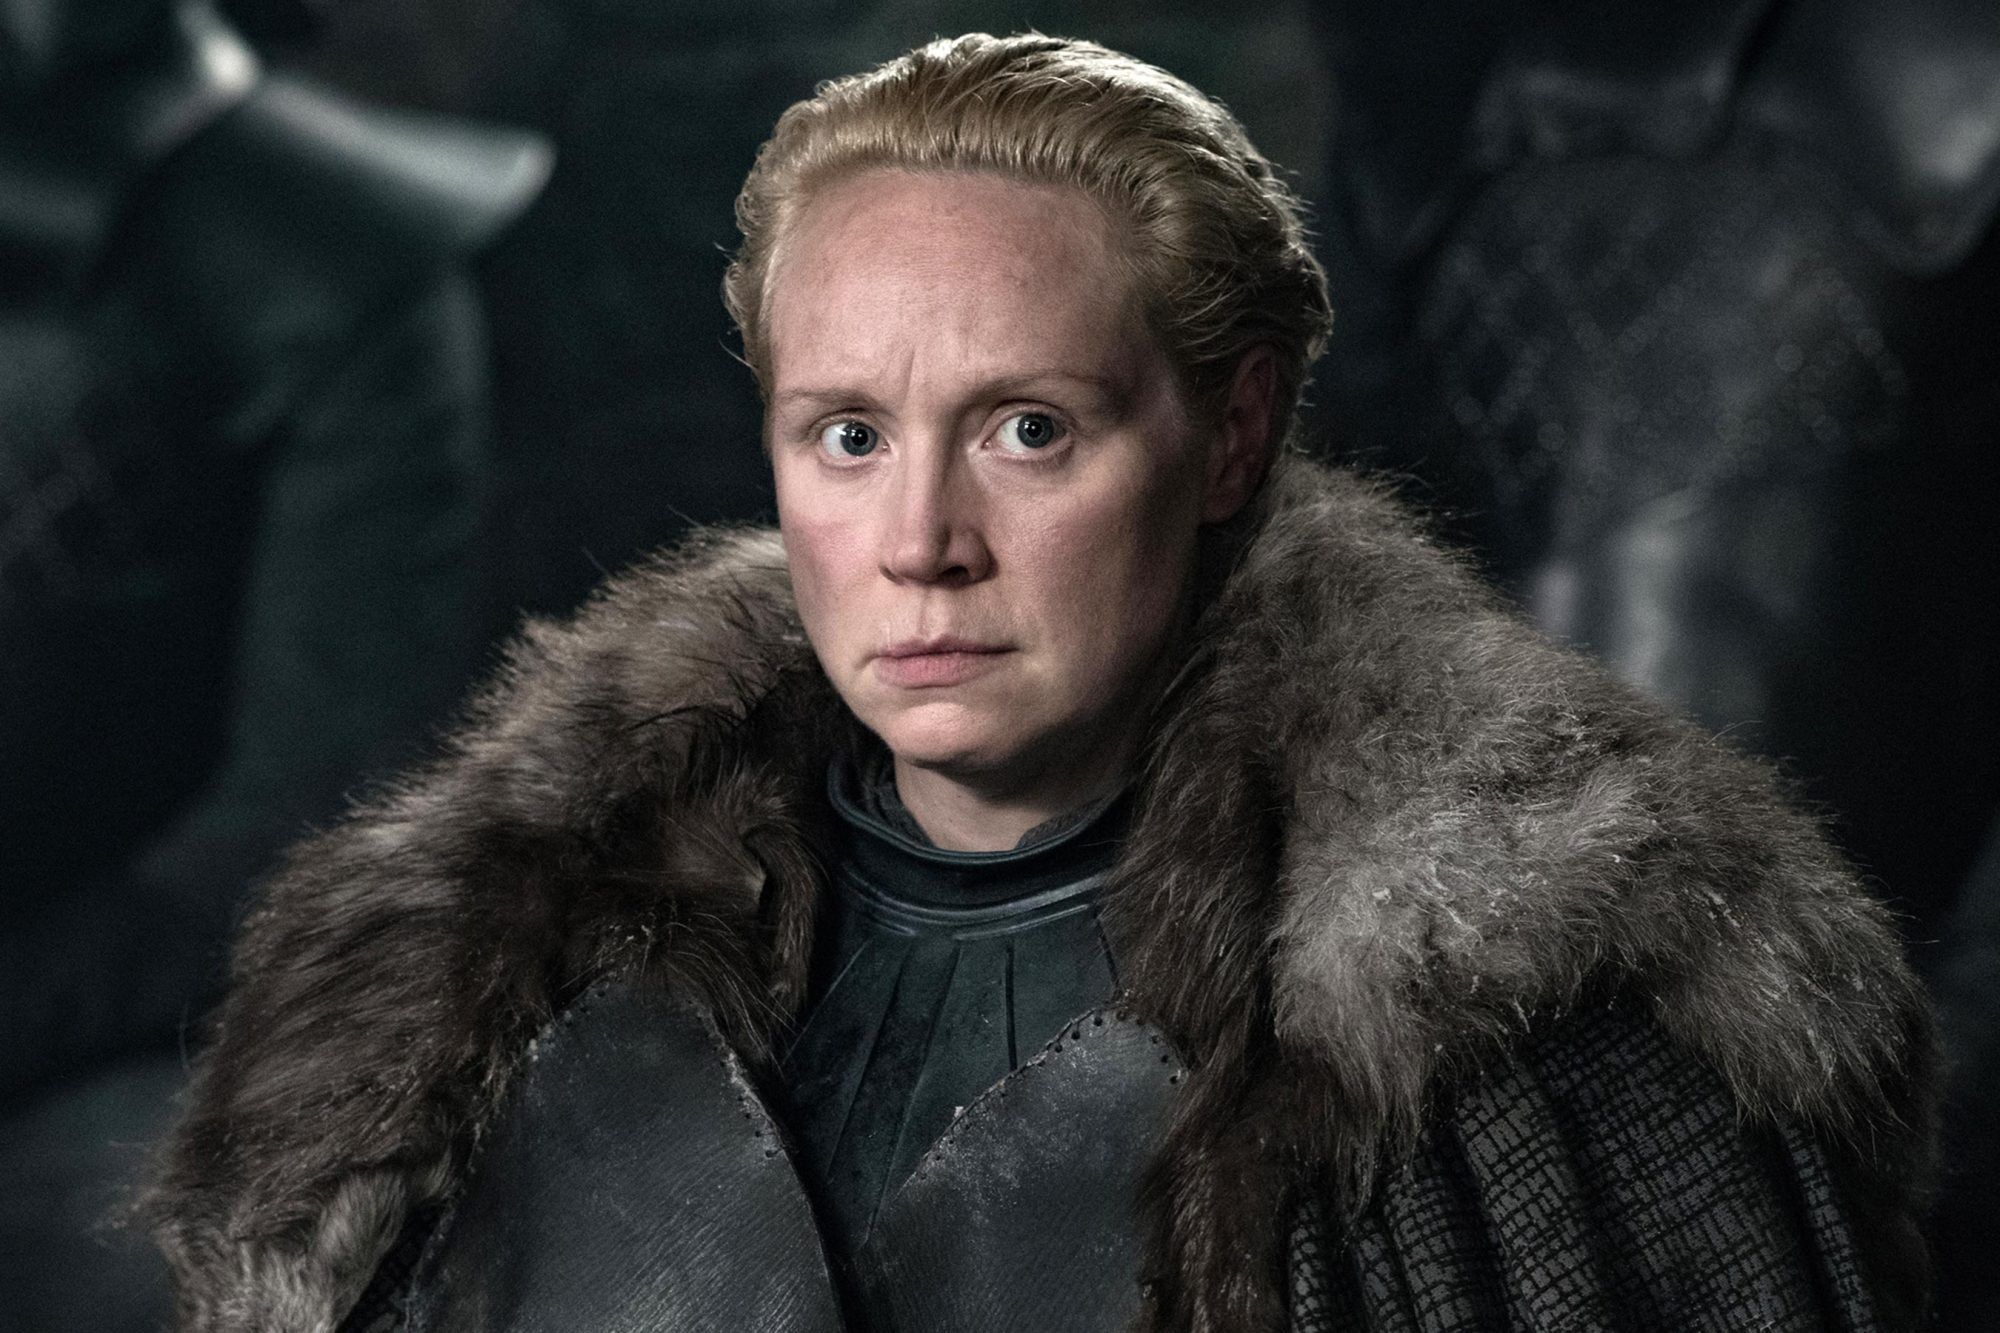 Gwendoline Christie in season 7 of Game of Thrones.